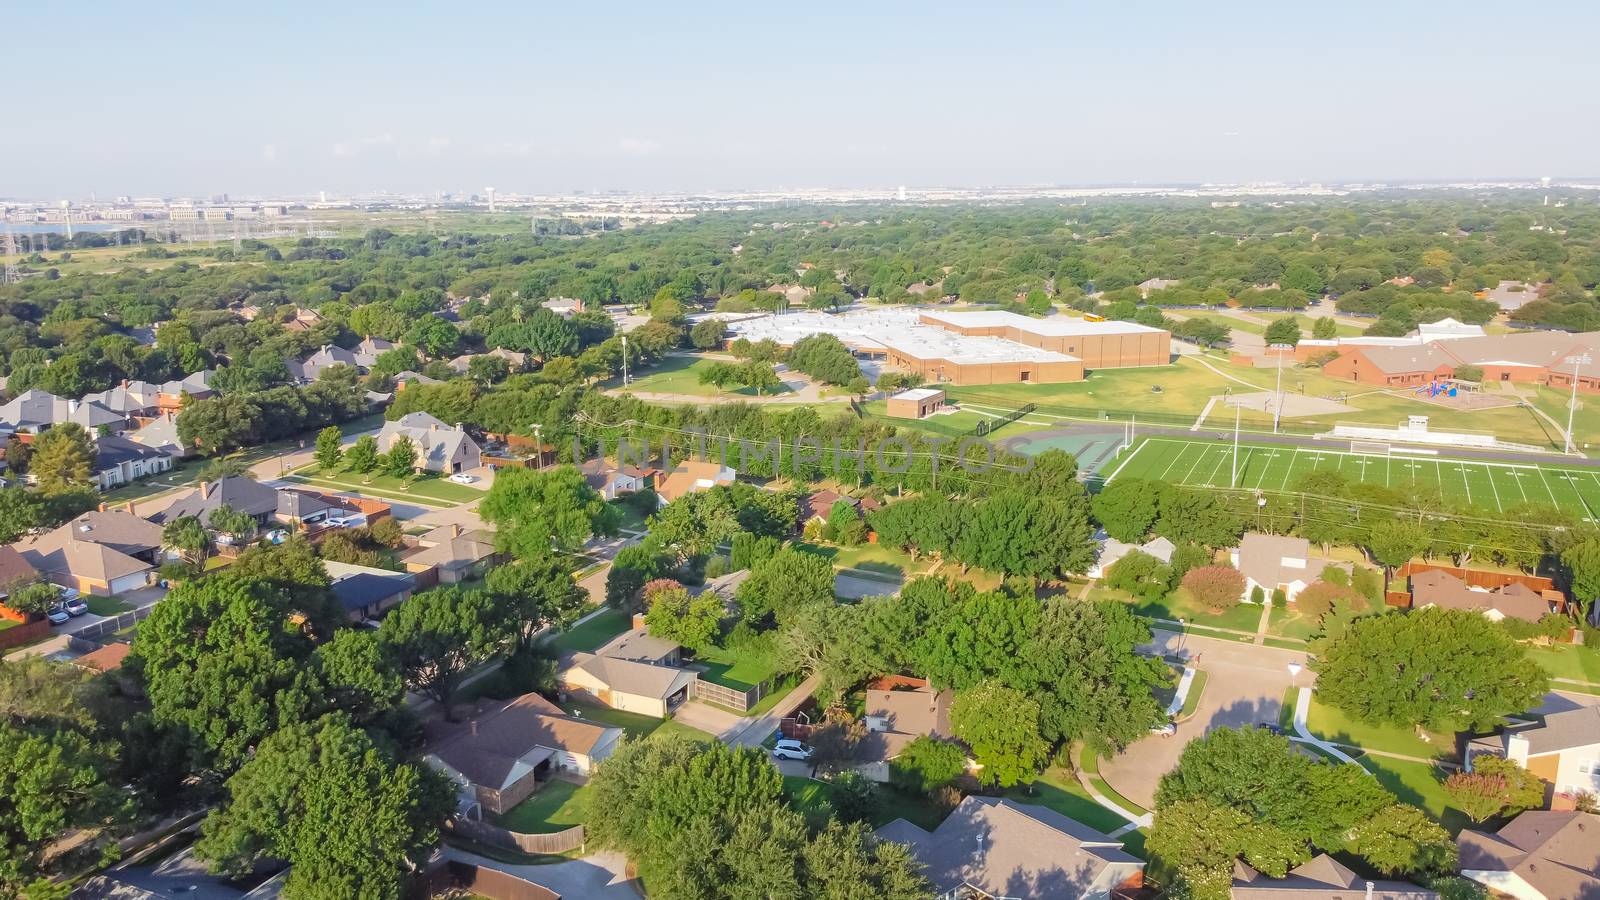 Aerial view residential neighborhood in school district with football field in near Dallas, Texas, USA by trongnguyen